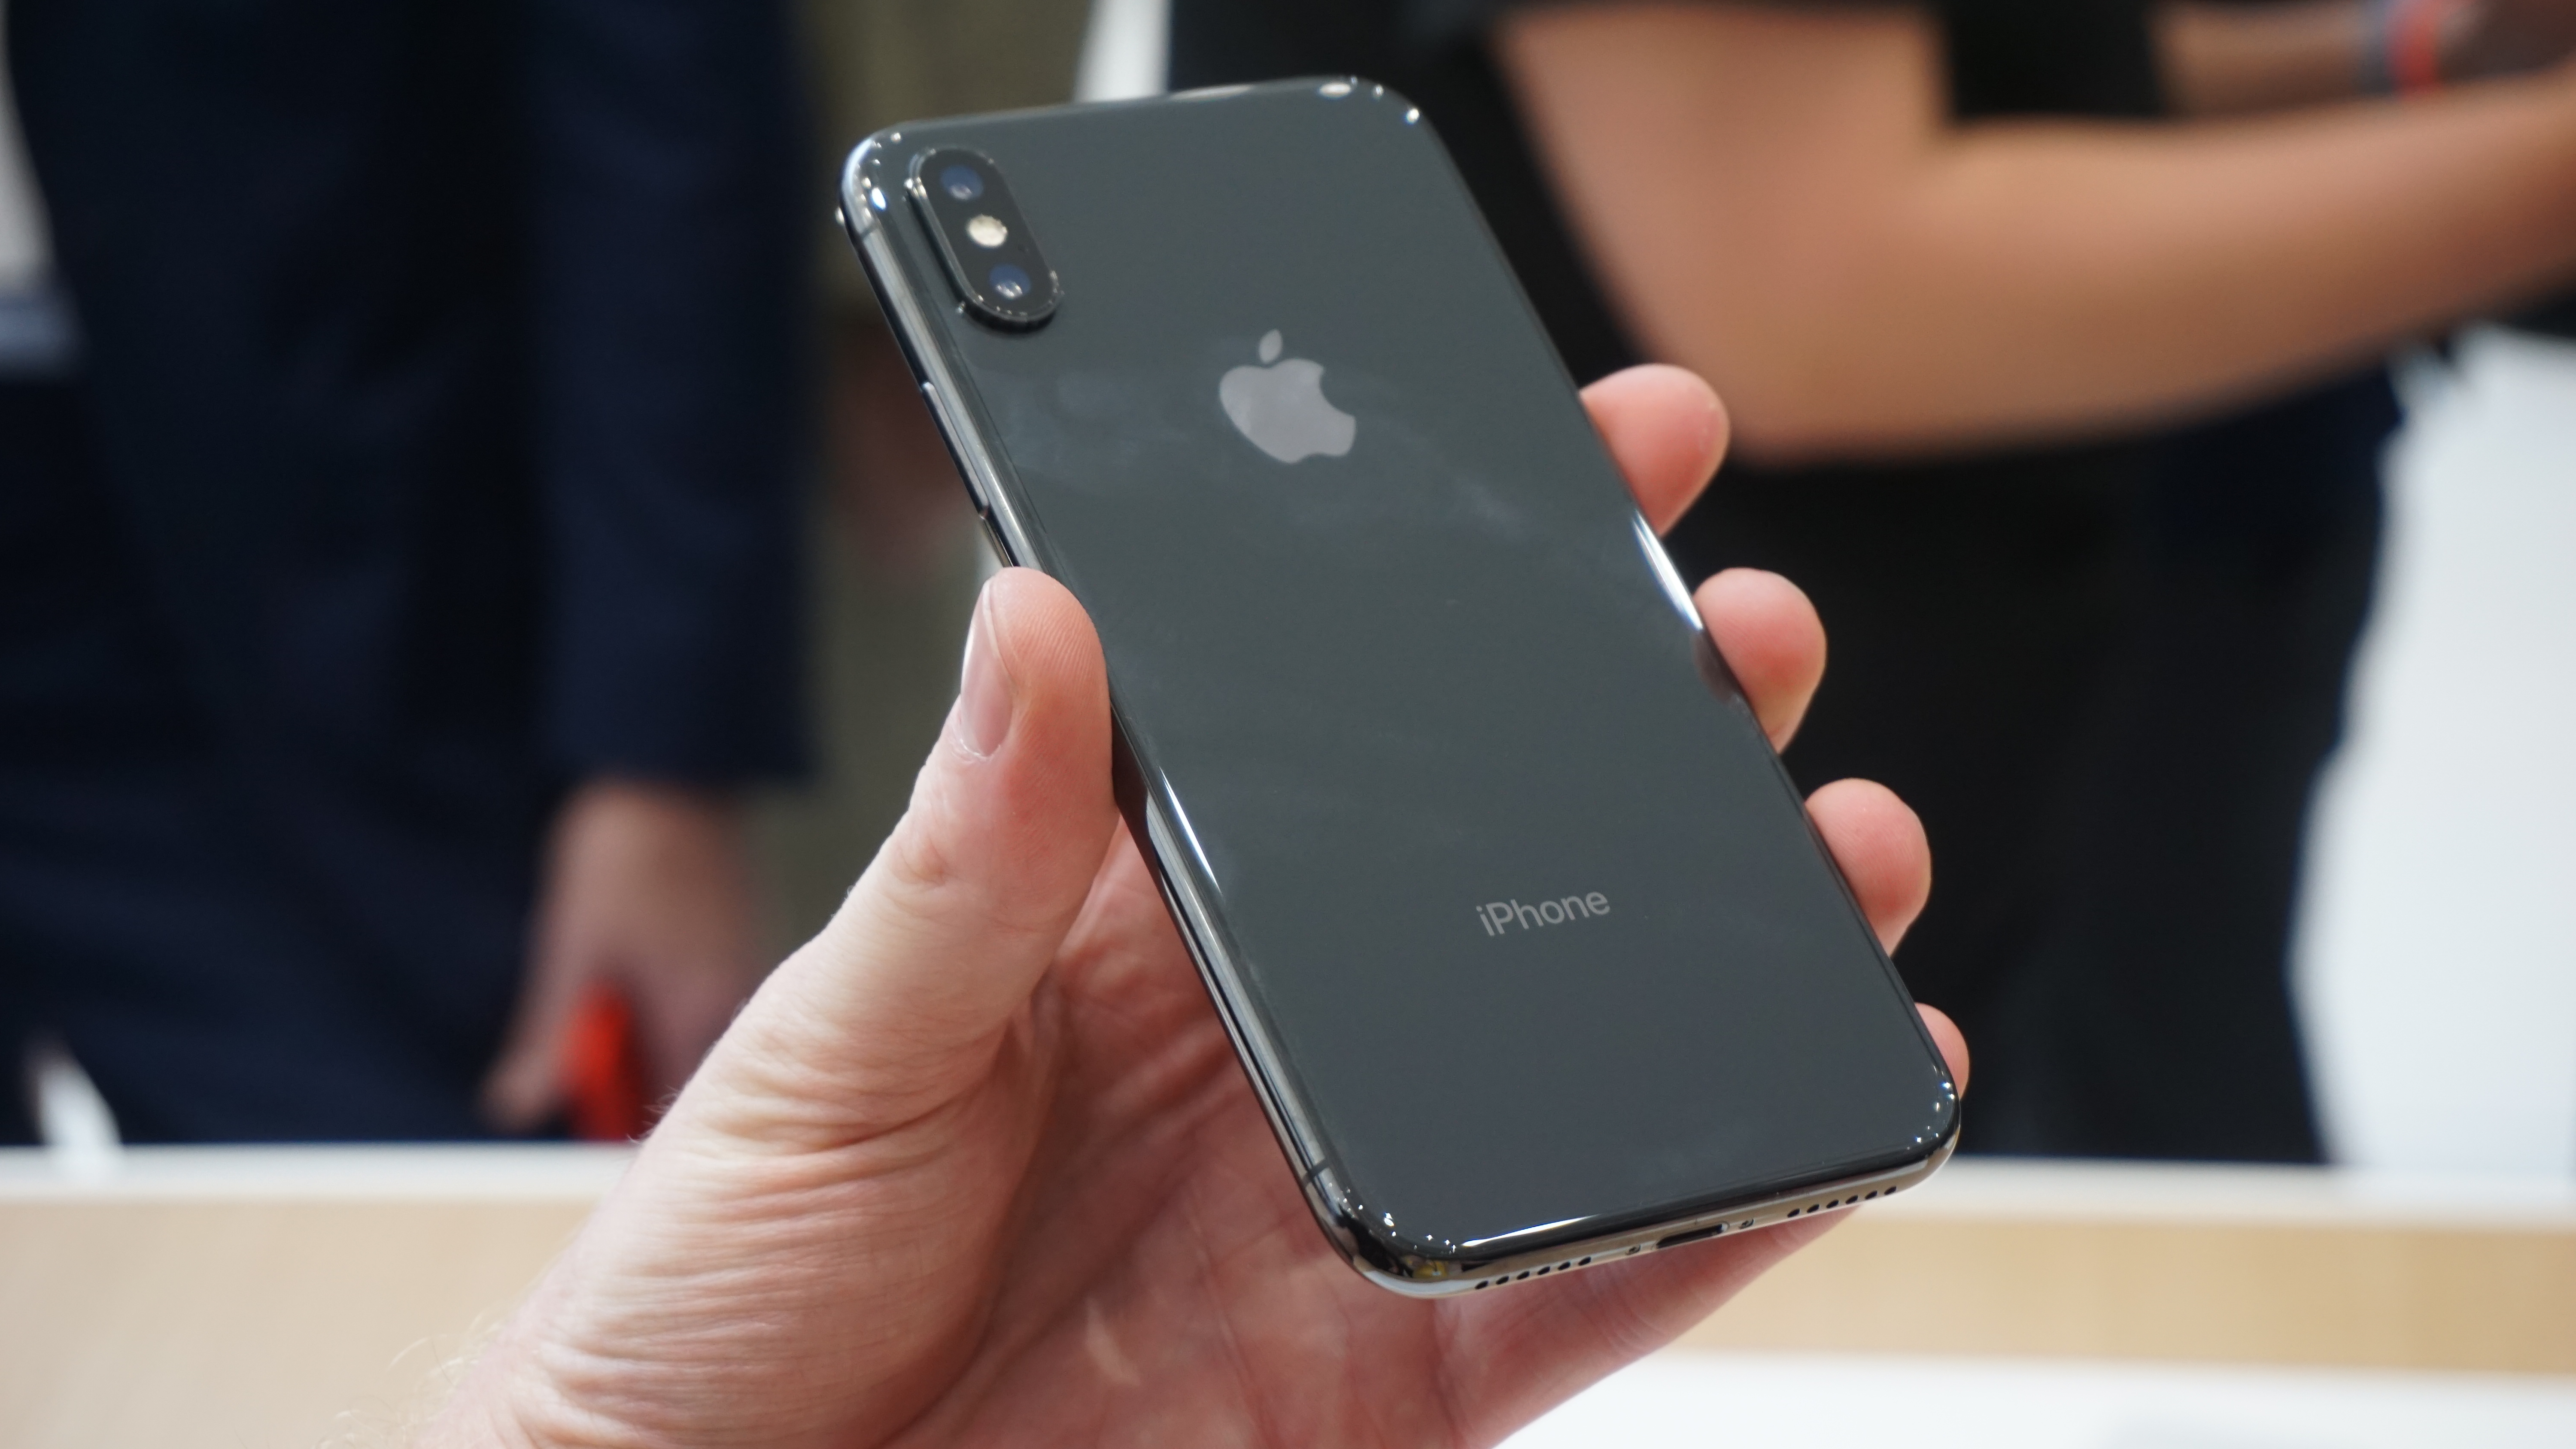 Collection of Amazing Full 4K iPhone X Images: Over 999+ Captivating Photos